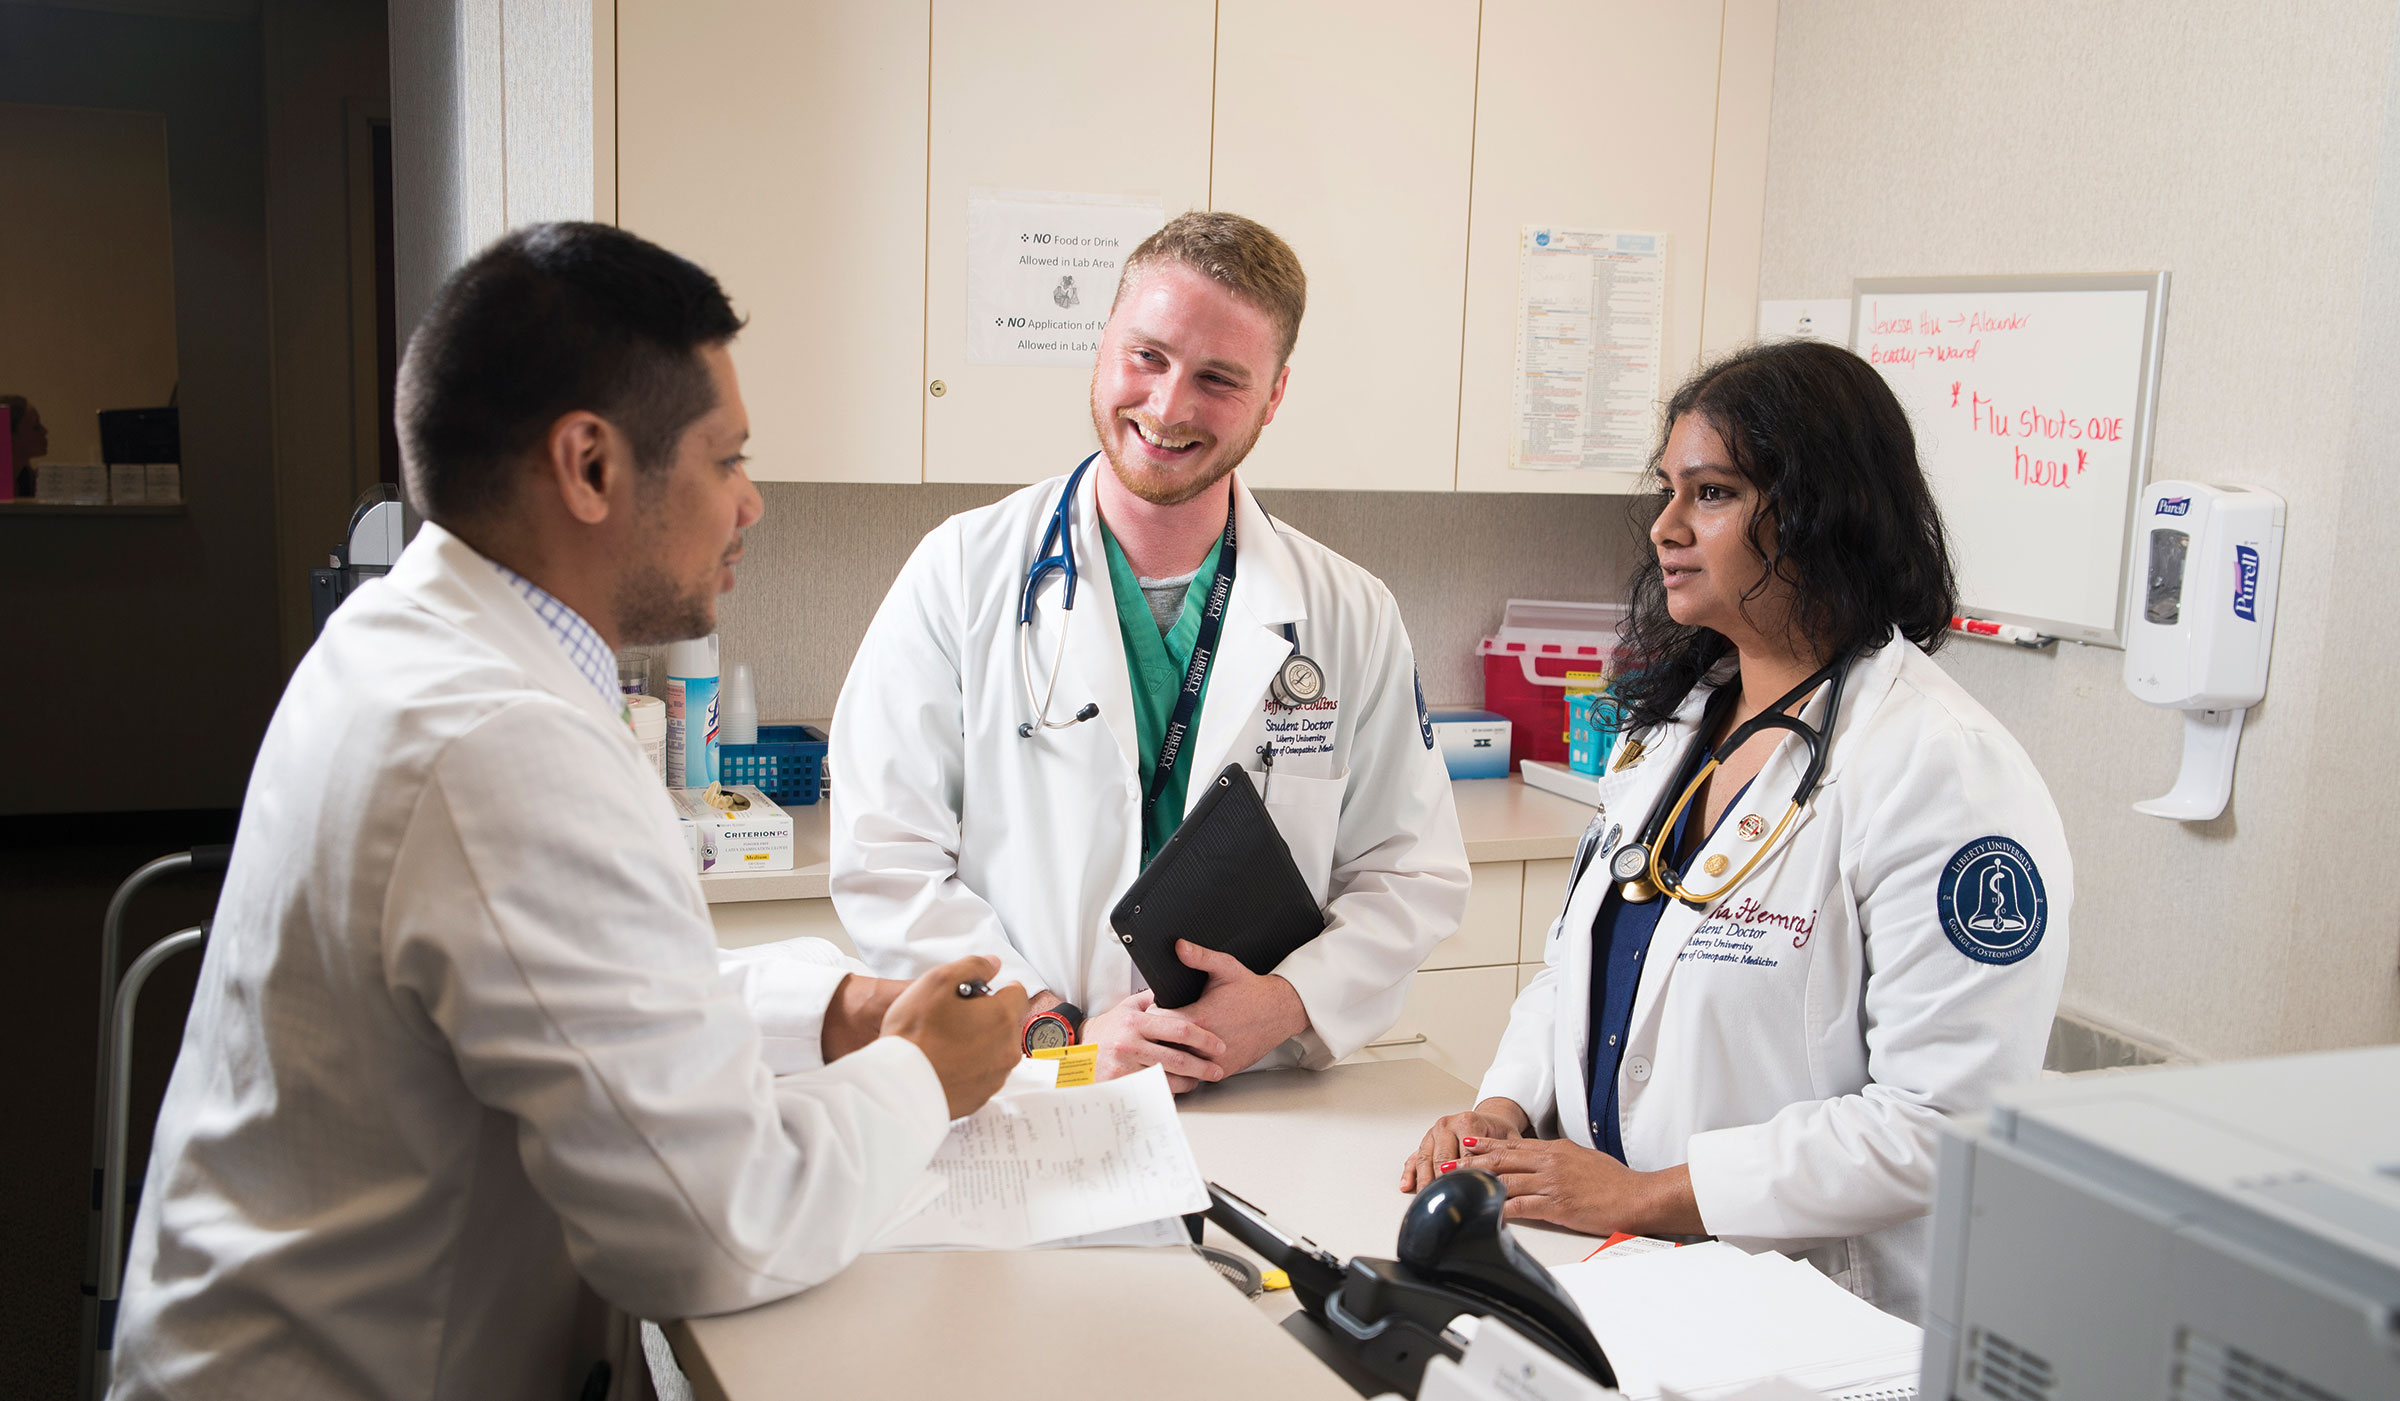 Third-year student-doctors (from left to right) Ernesto Enrique, Jeffrey Collins, and Nia Hemraj are working at the Danville Regional Medical Center, completing their clinical rotations.